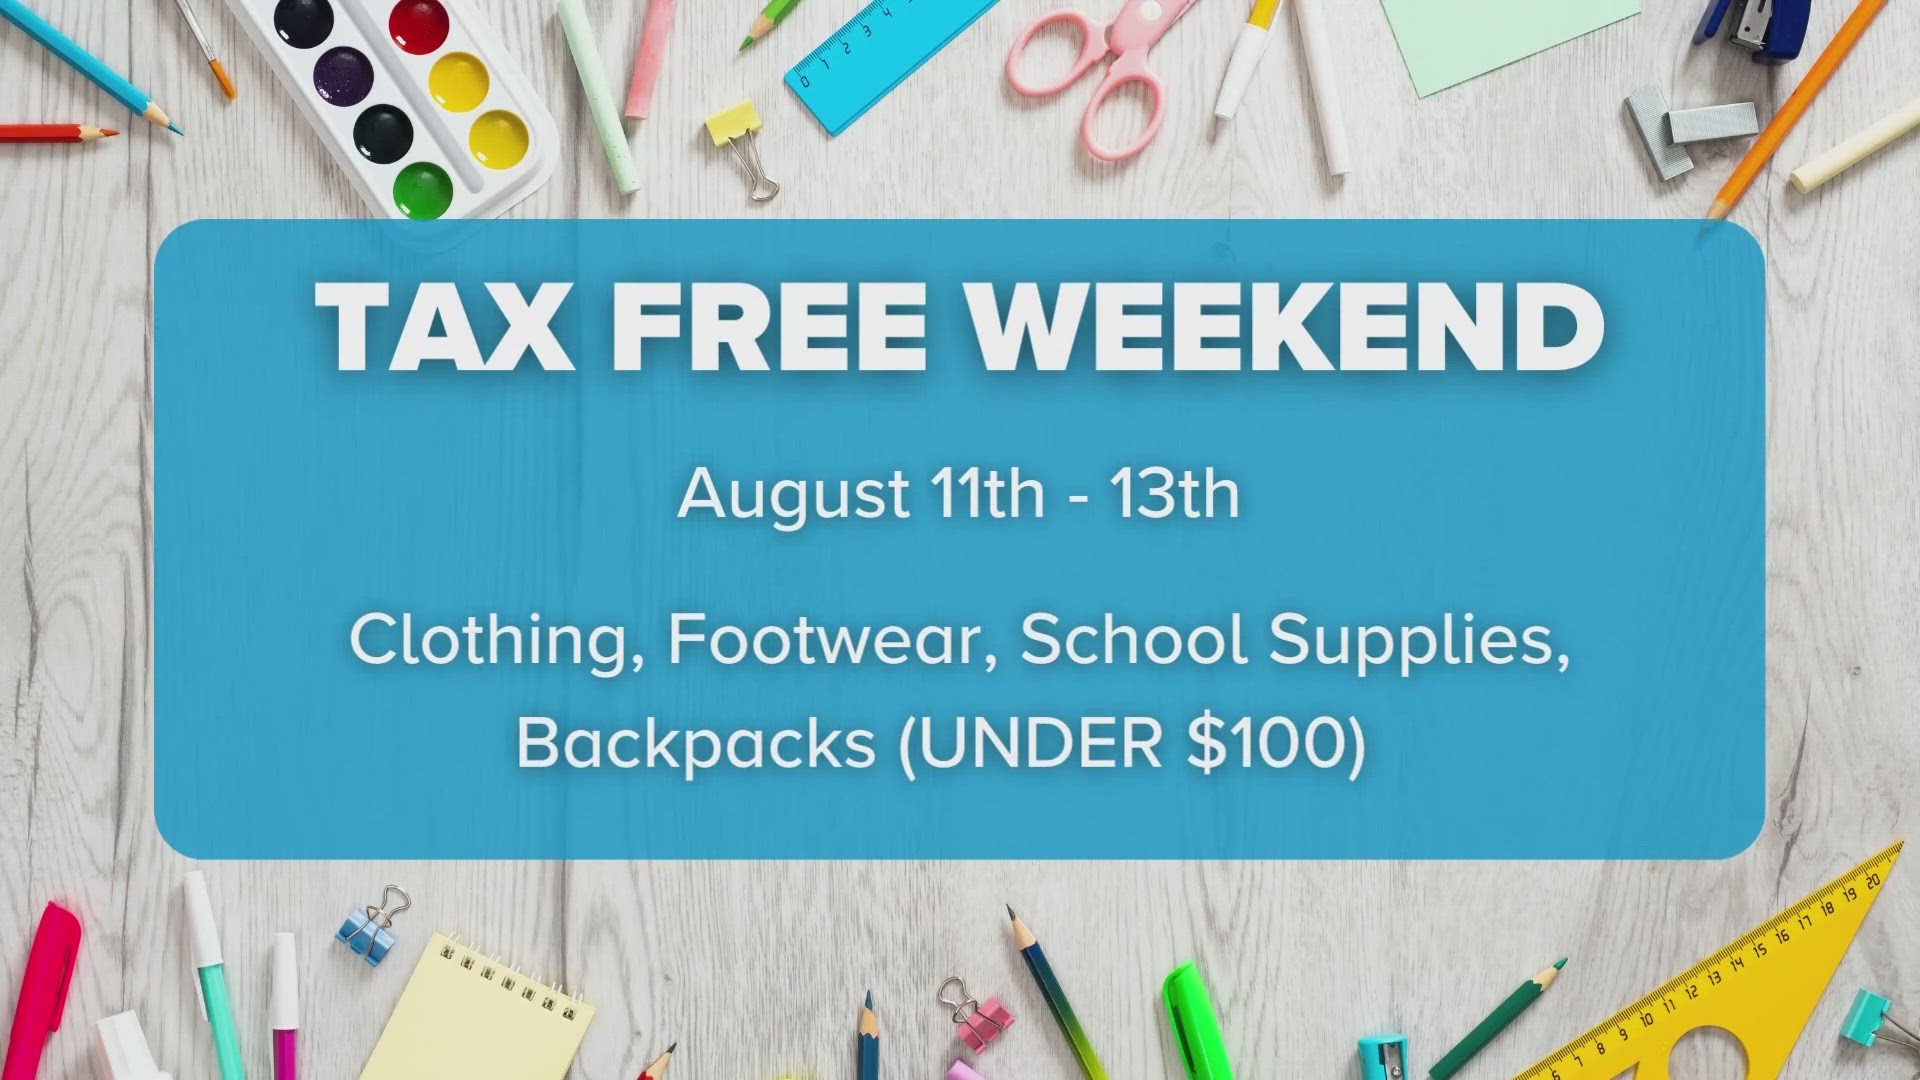 This year’s sale tax holiday begins Friday, Aug. 11, and goes through midnight Sunday, Aug. 13.